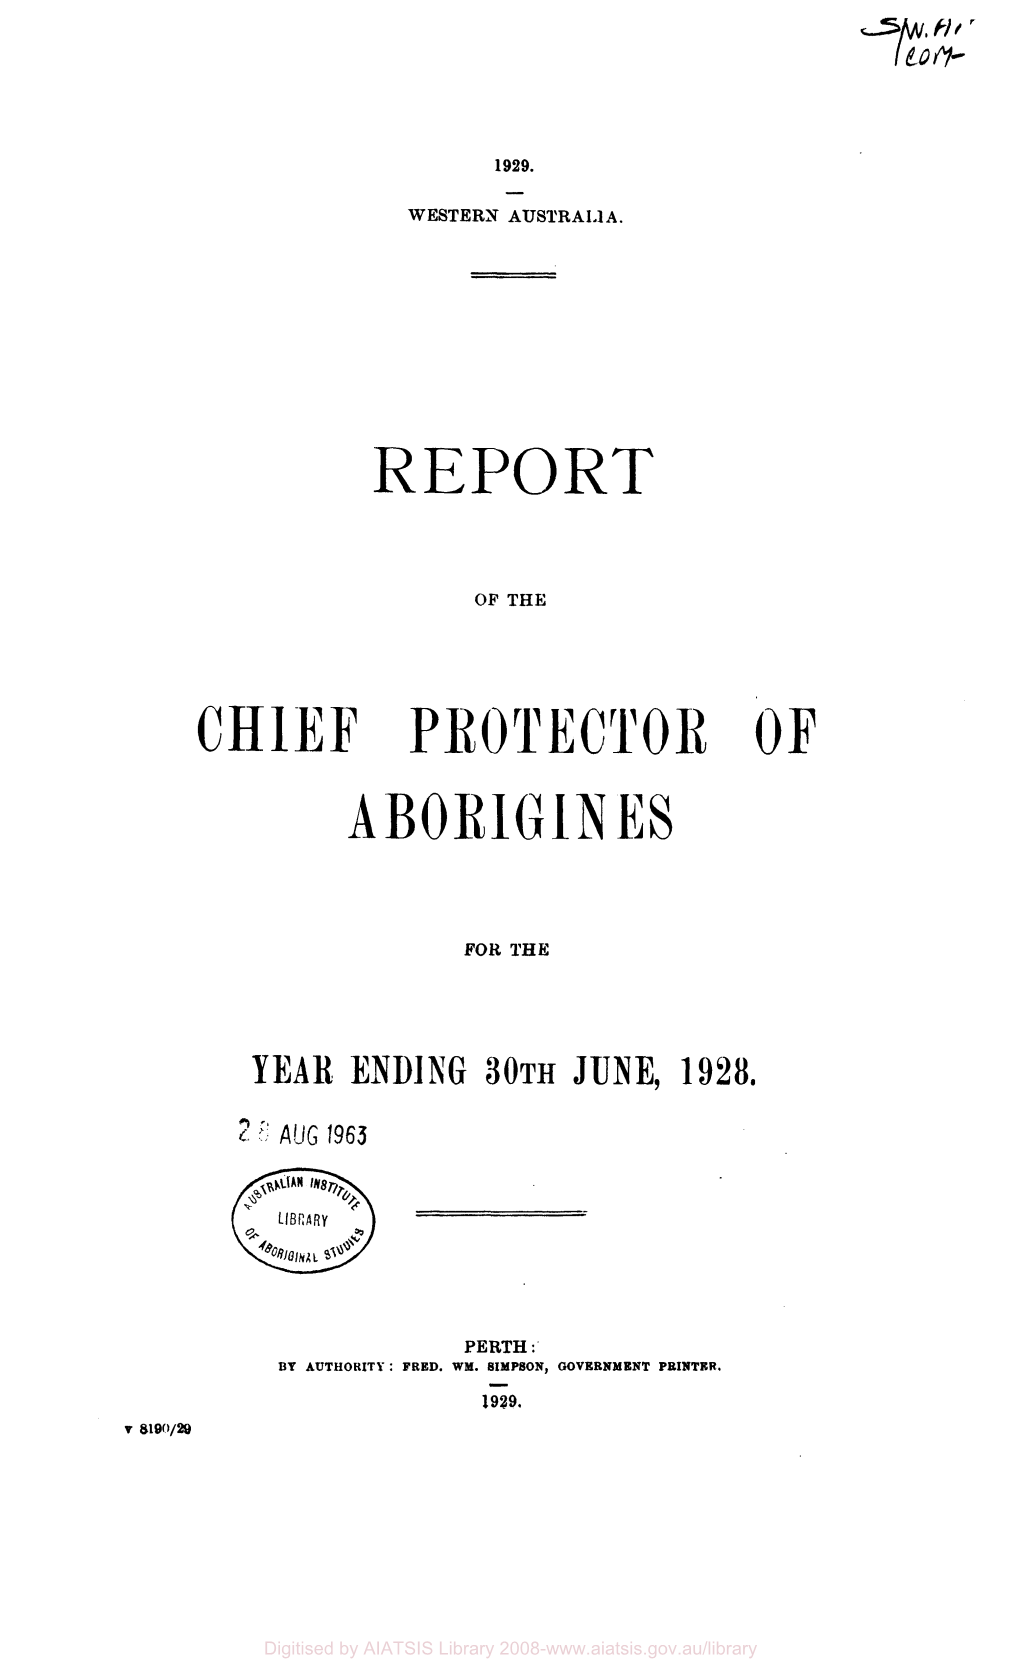 Report of the Chief Protector of Aborigines for the Year Ending 30Th